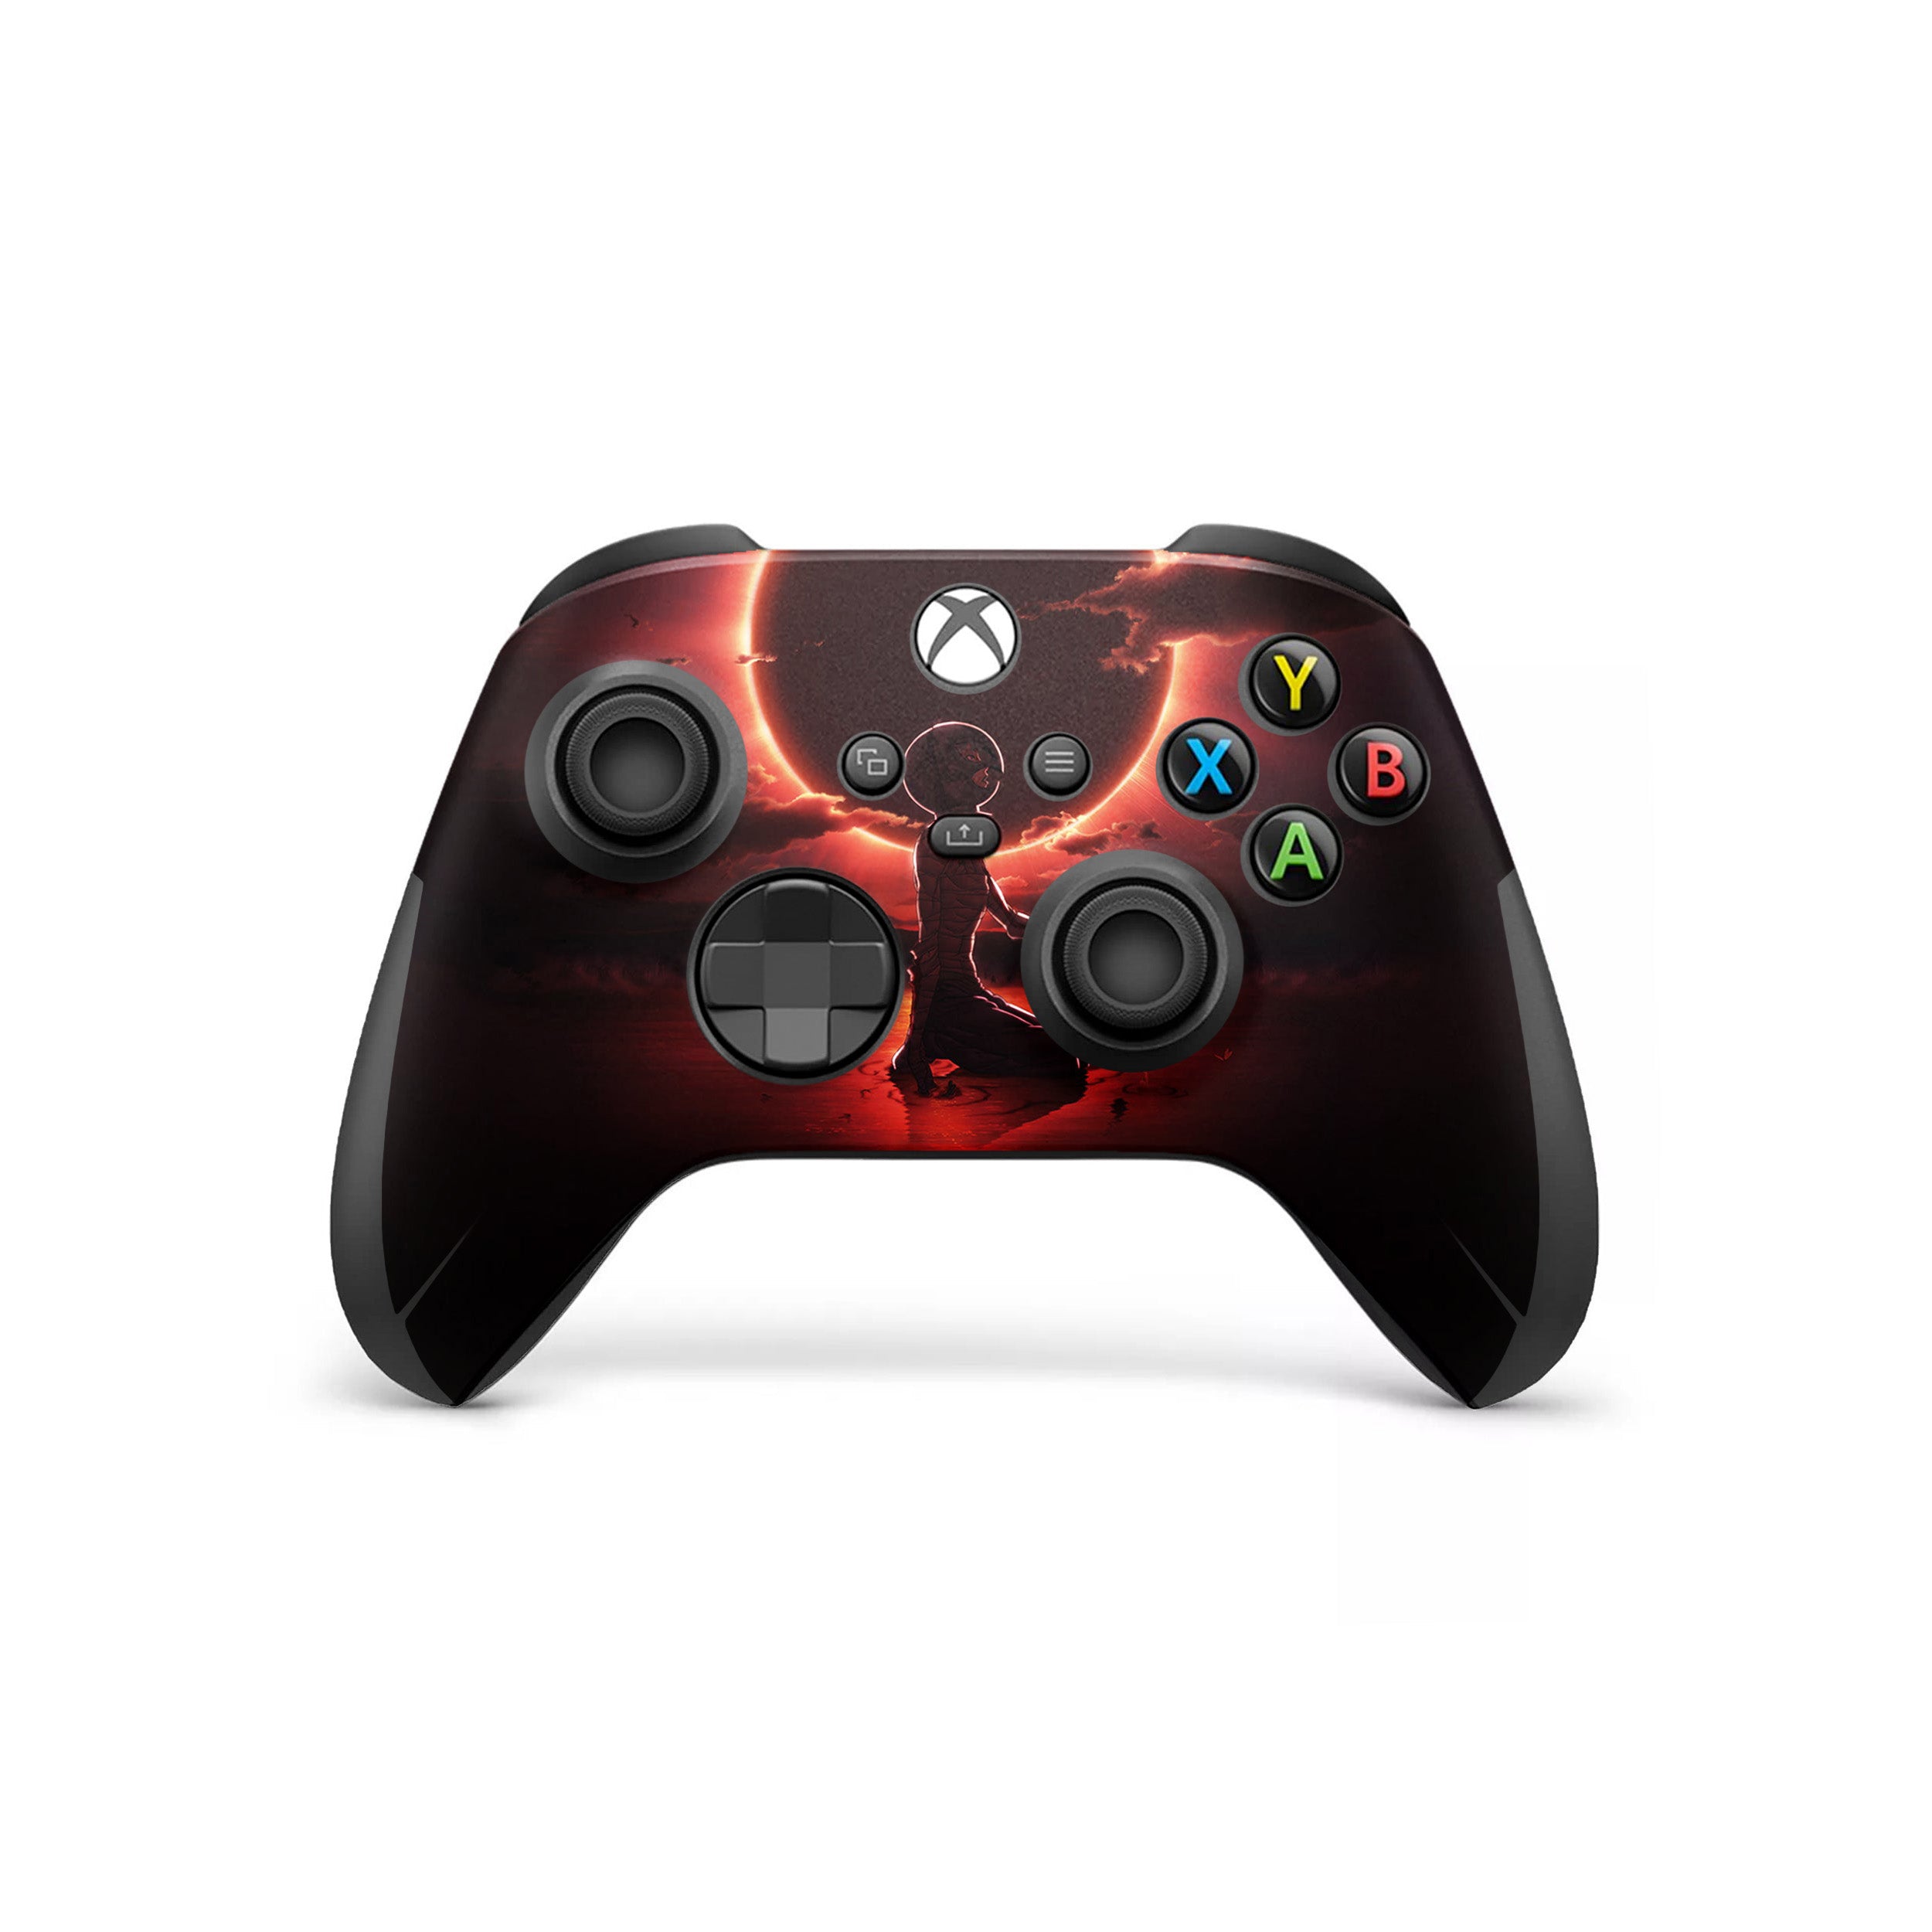 A video game skin featuring a Berserk Griffith design for the Xbox Wireless Controller.